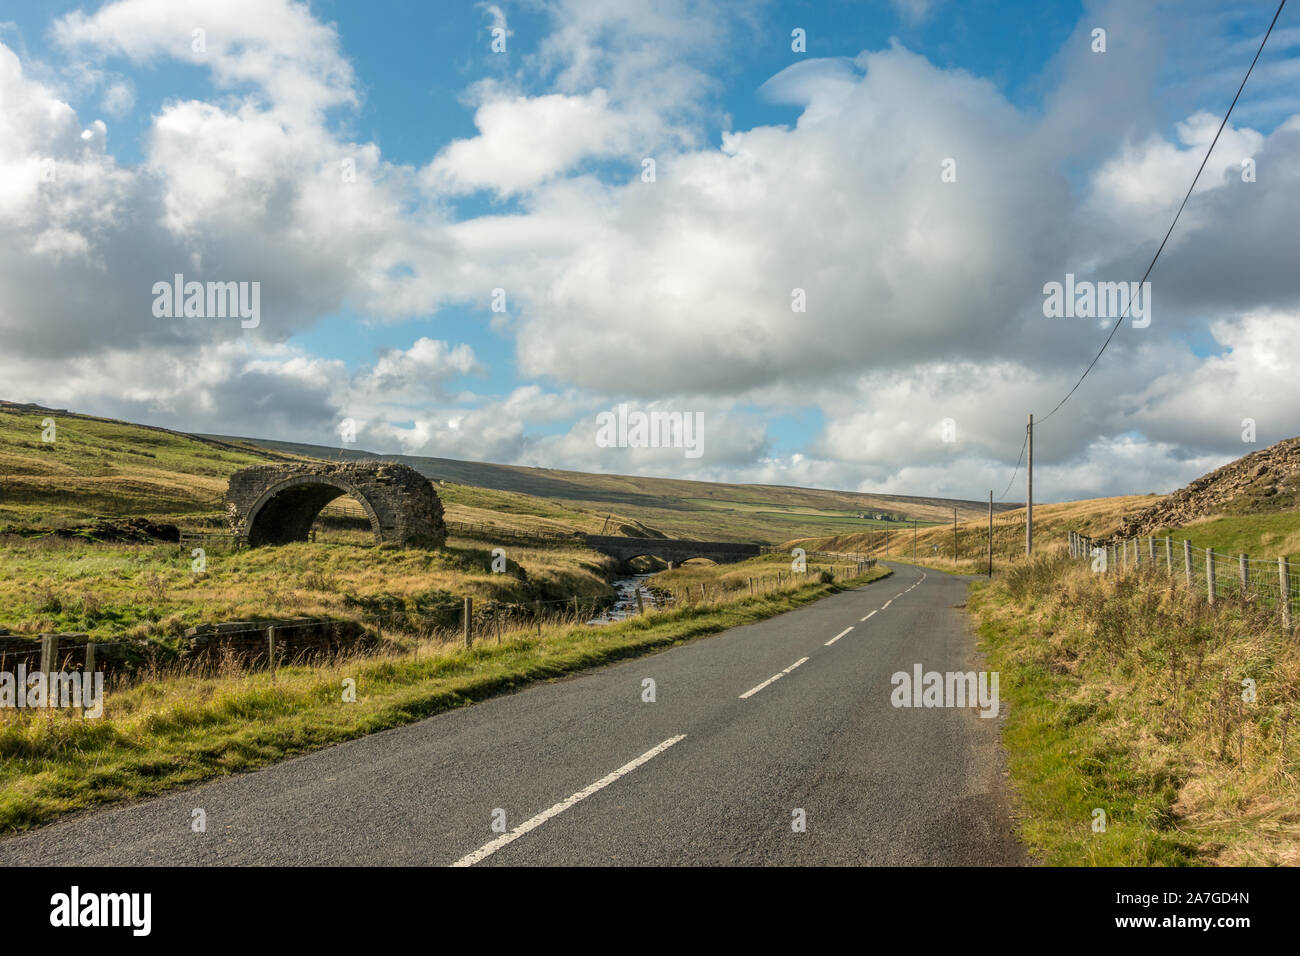 Remaining arch of the lead smelt mill flue viaduct bridge next to the road, Rookhope, above Weardale, County Durham, England, UK Stock Photo